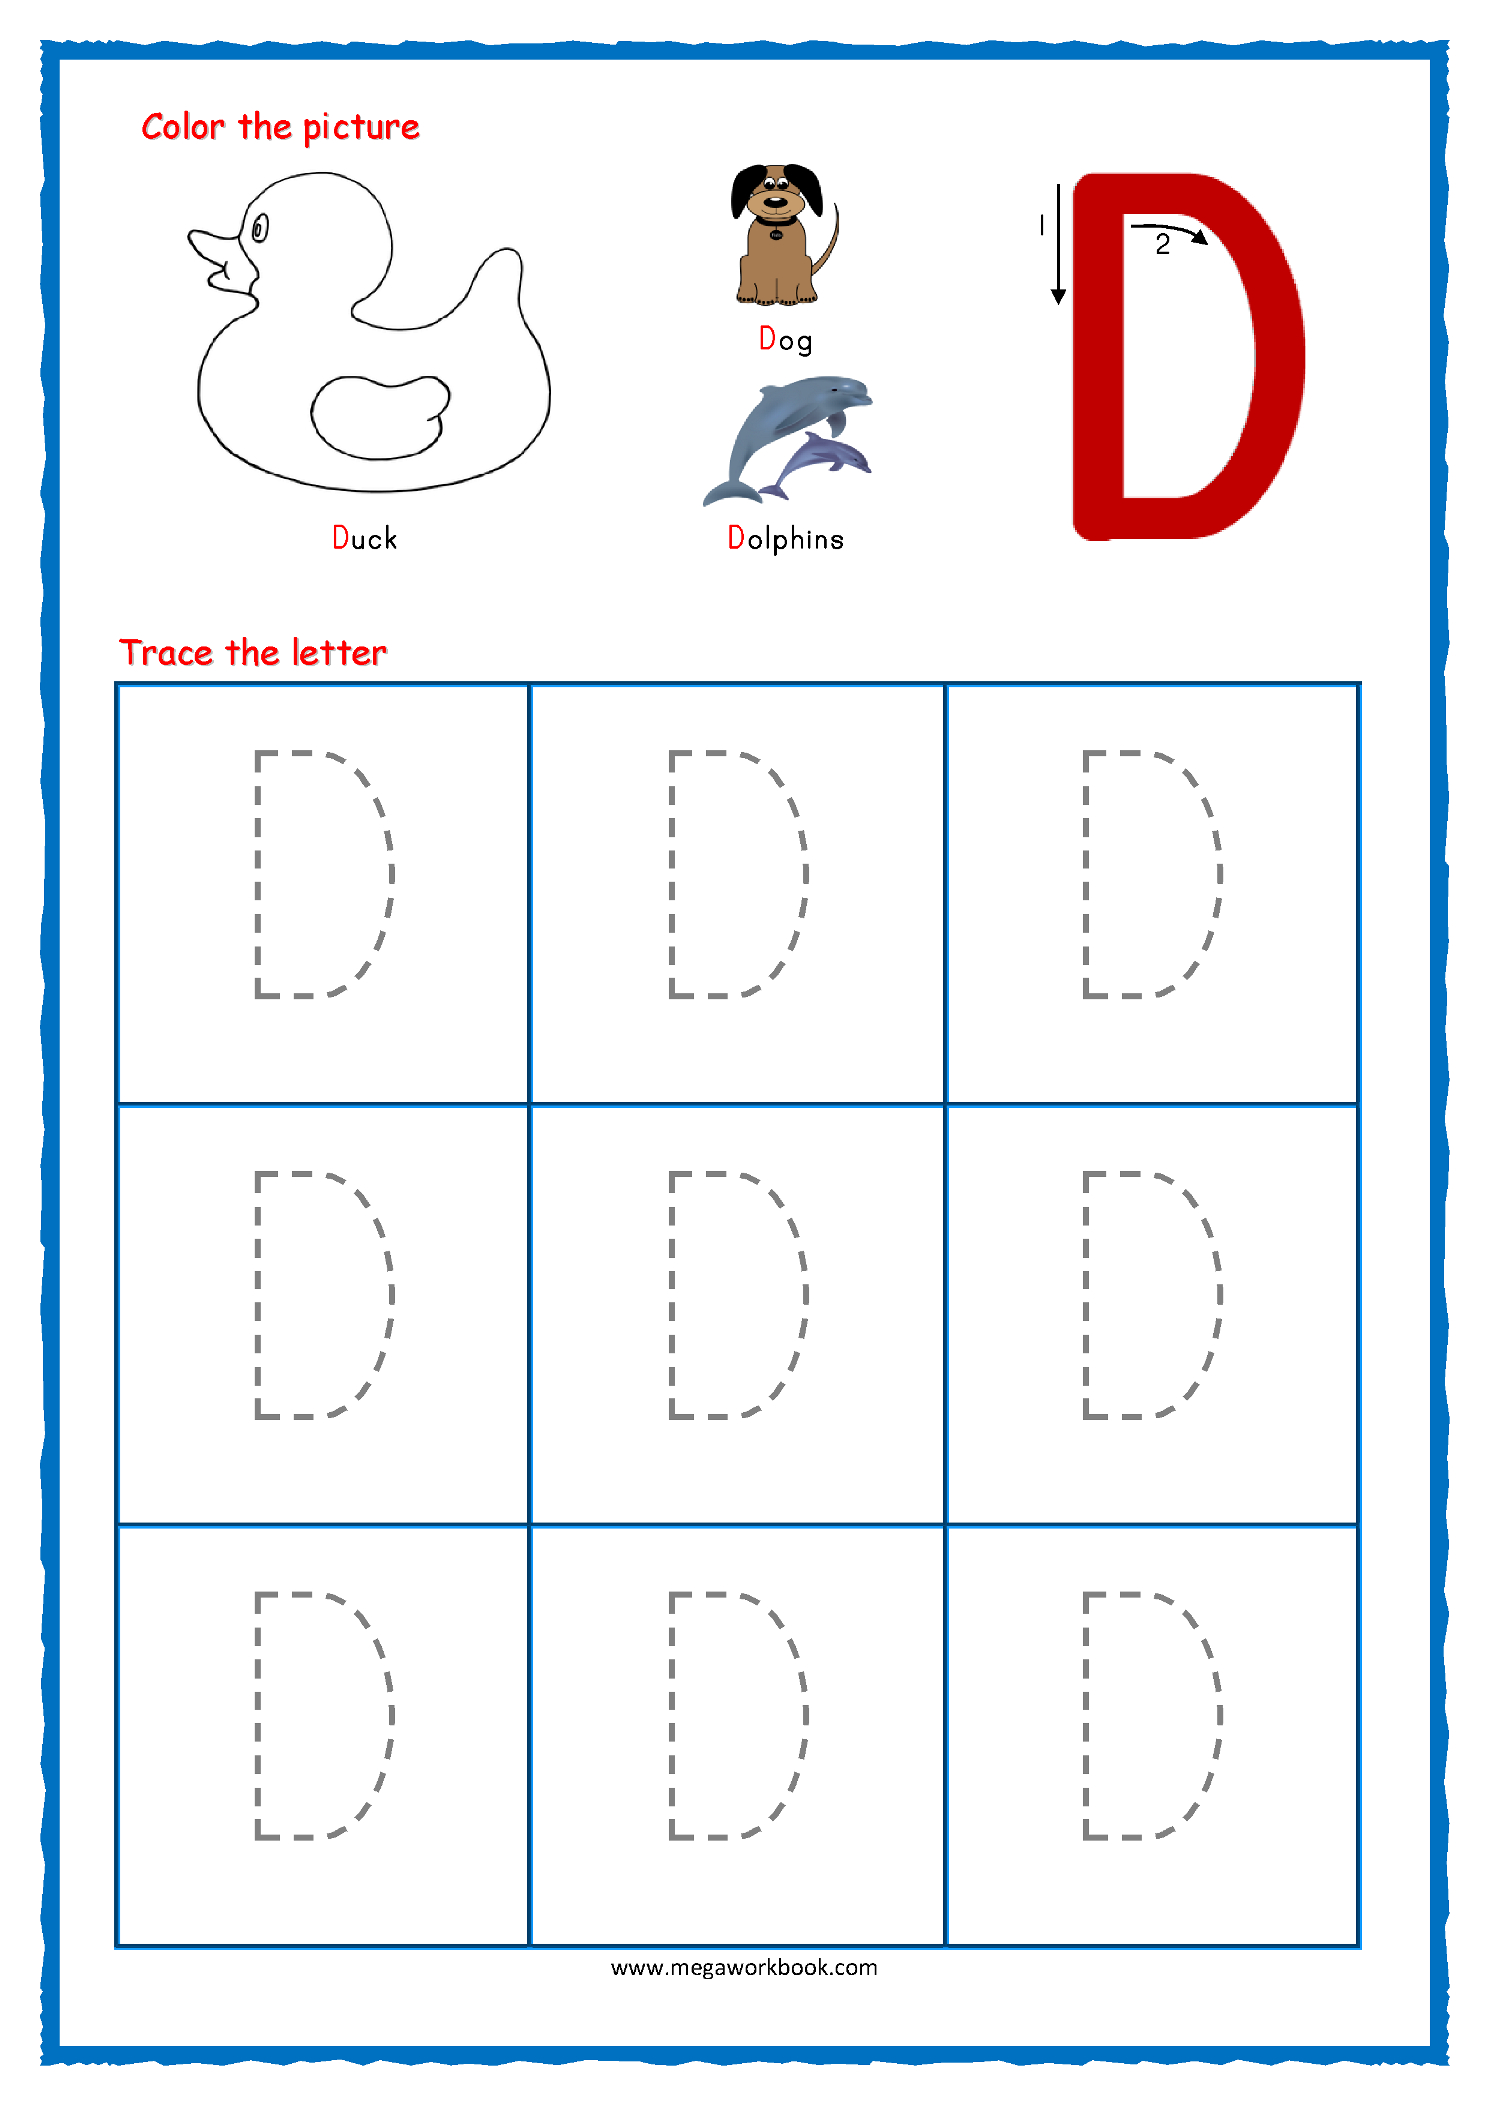 Tracing Letters - Alphabet Tracing - Capital Letters intended for Tracing The Letters Worksheets